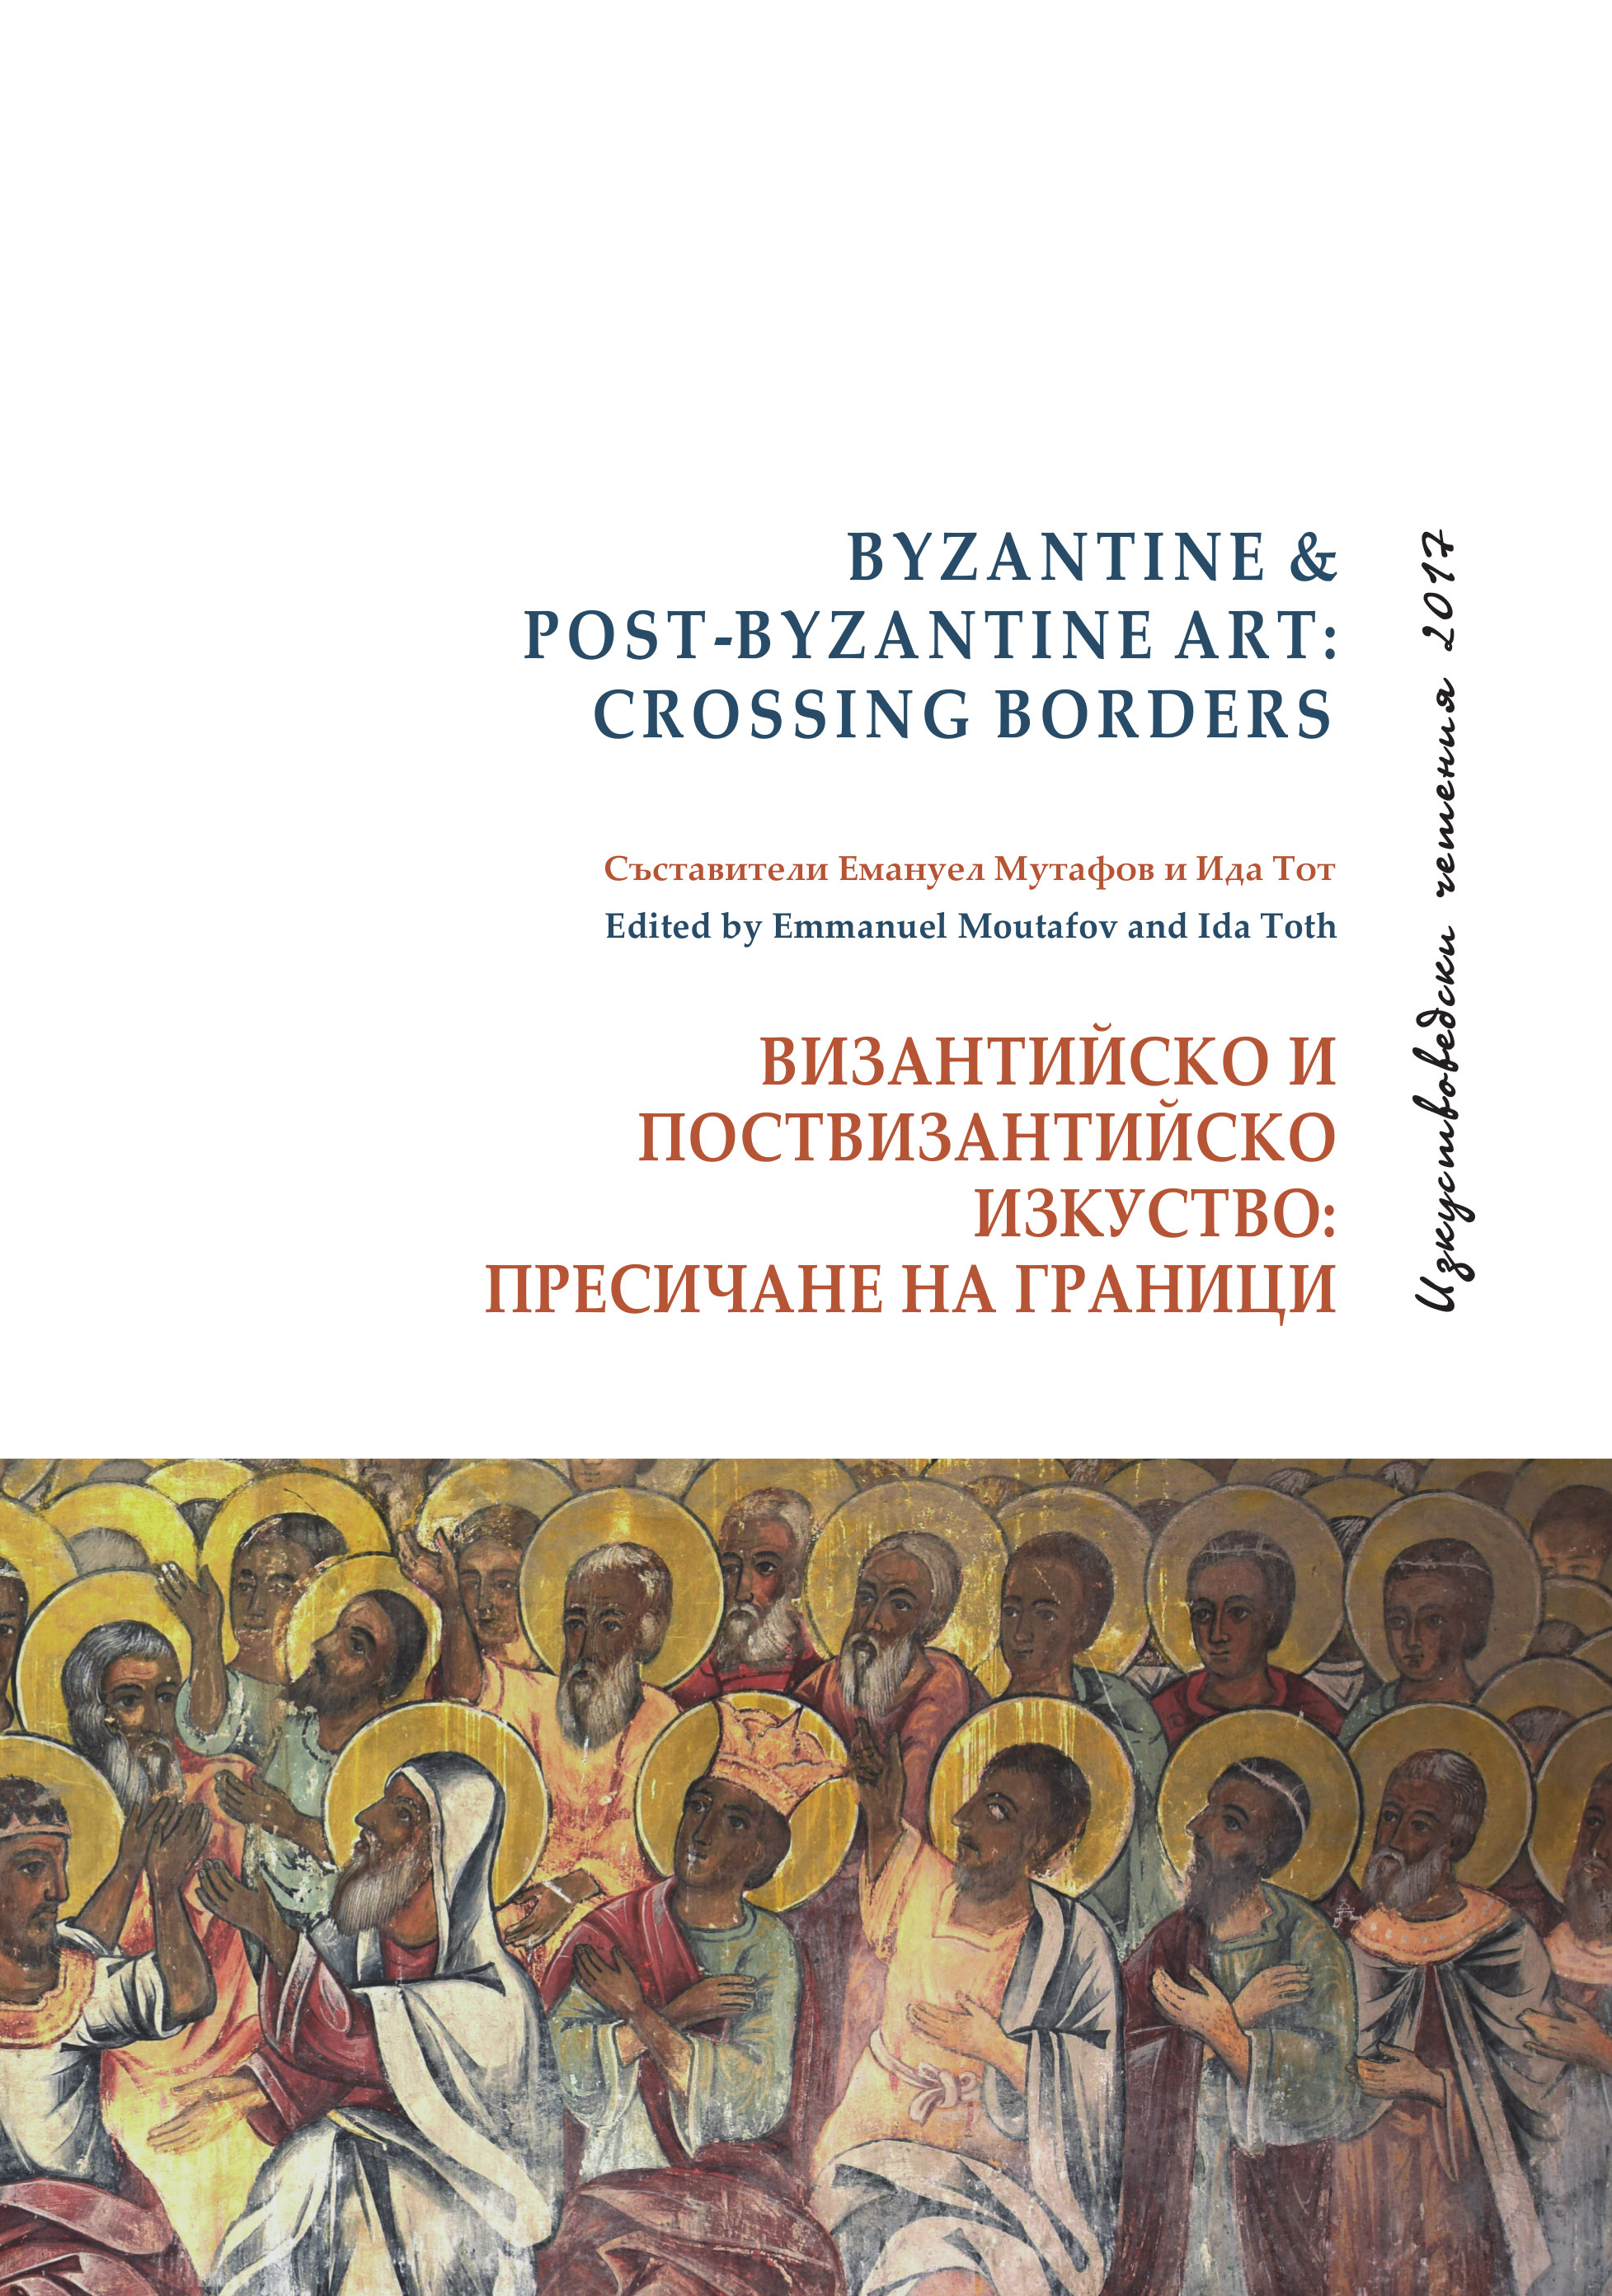 Post-Byzantine Wall Paintings in Euboea: The Monastery of Panagia Peribleptos at Politika Cover Image